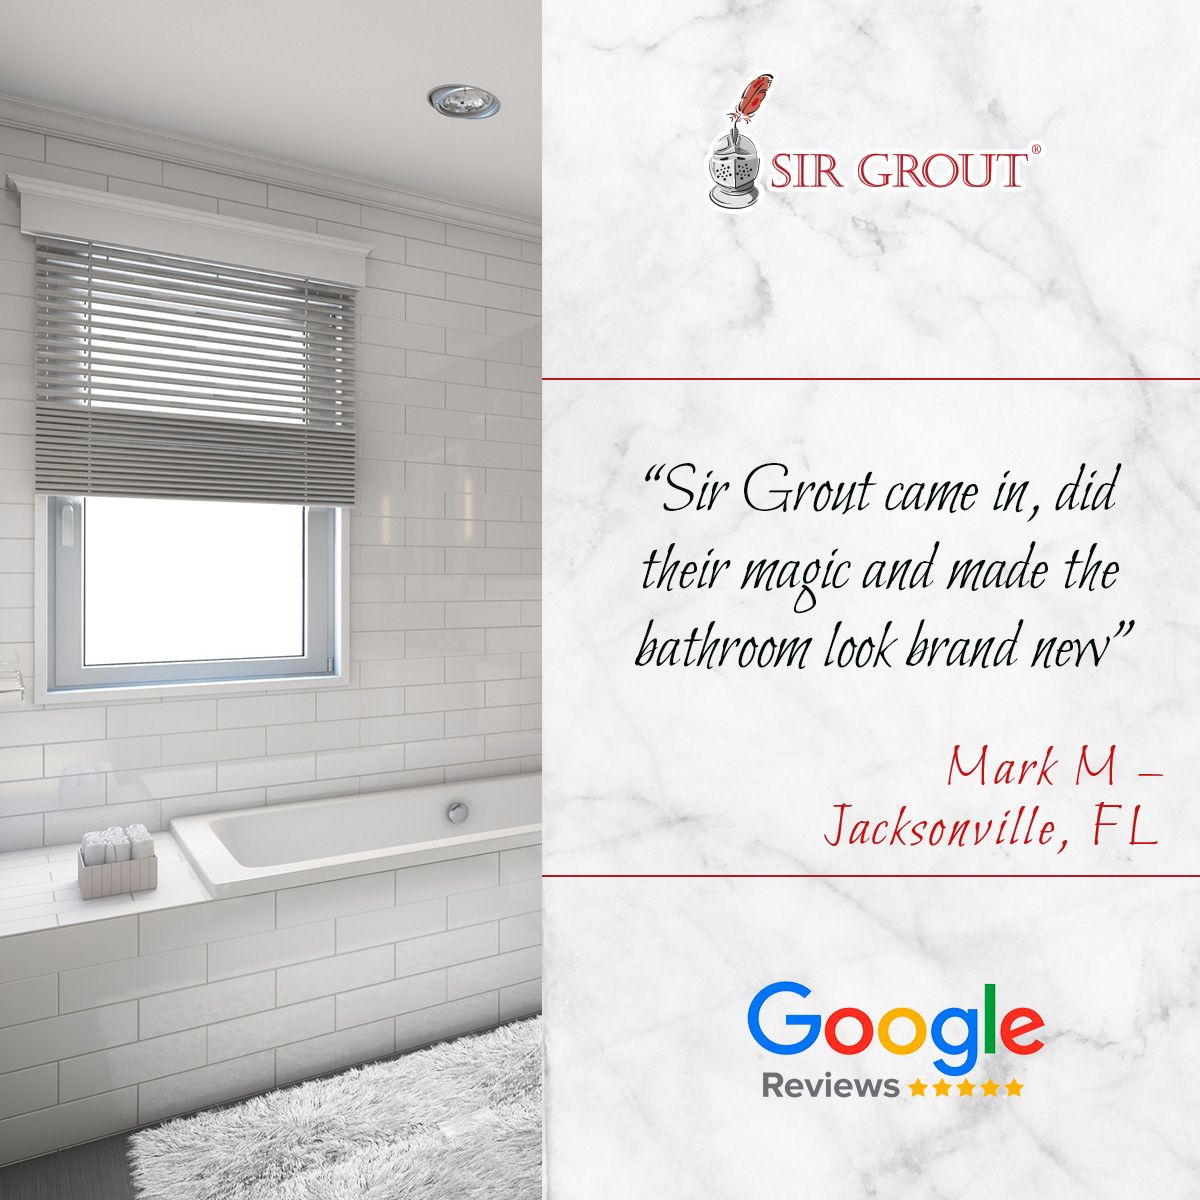 Sir Grout came in, did their magic and made the bathroom look brand new.